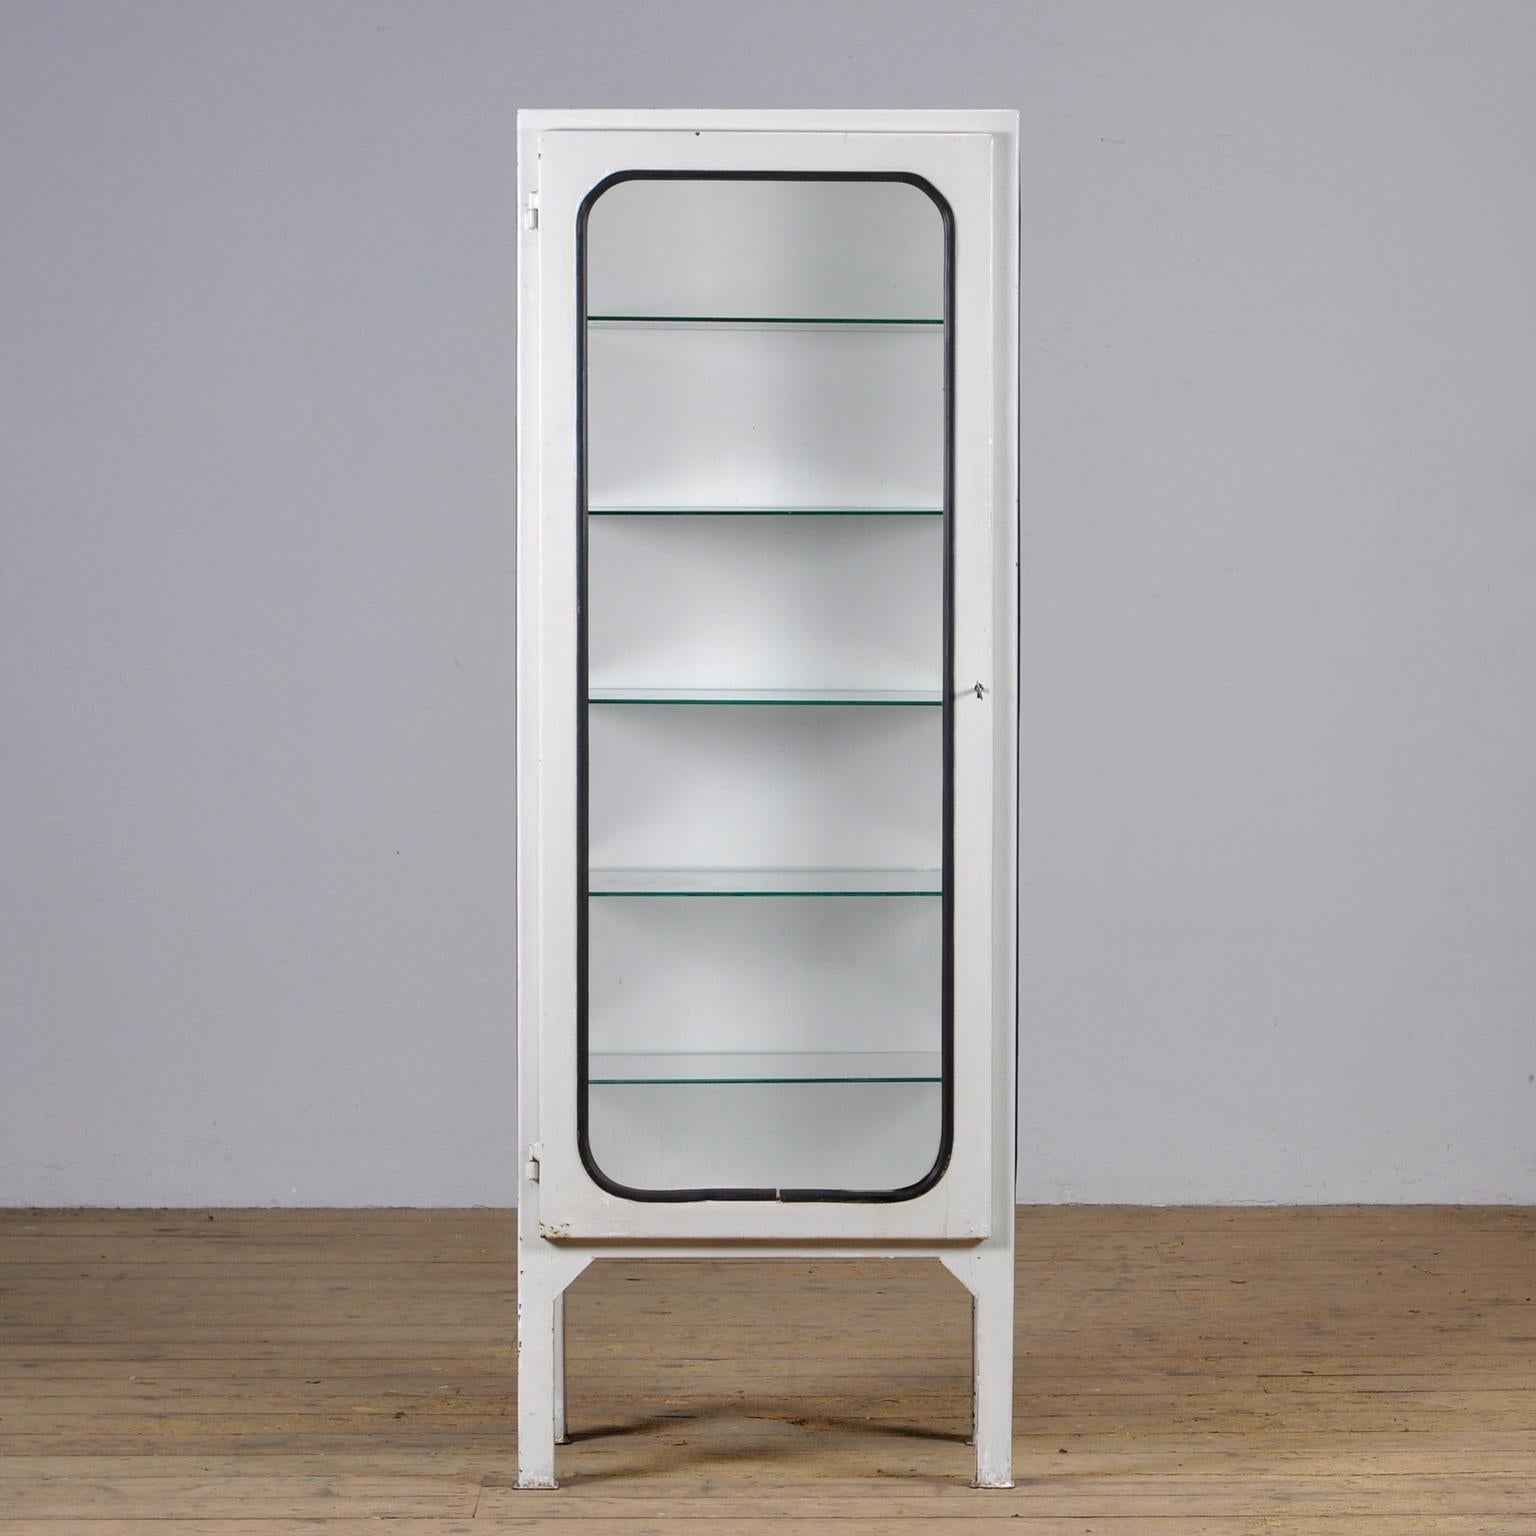 This medical cabinet was designed in the 1970s and was produced circa 1975 in hungary. It is made from iron and glass with new glass shelves. The glass is held by a black rubber strip. The cabinet features five adjustable glass shelves and a